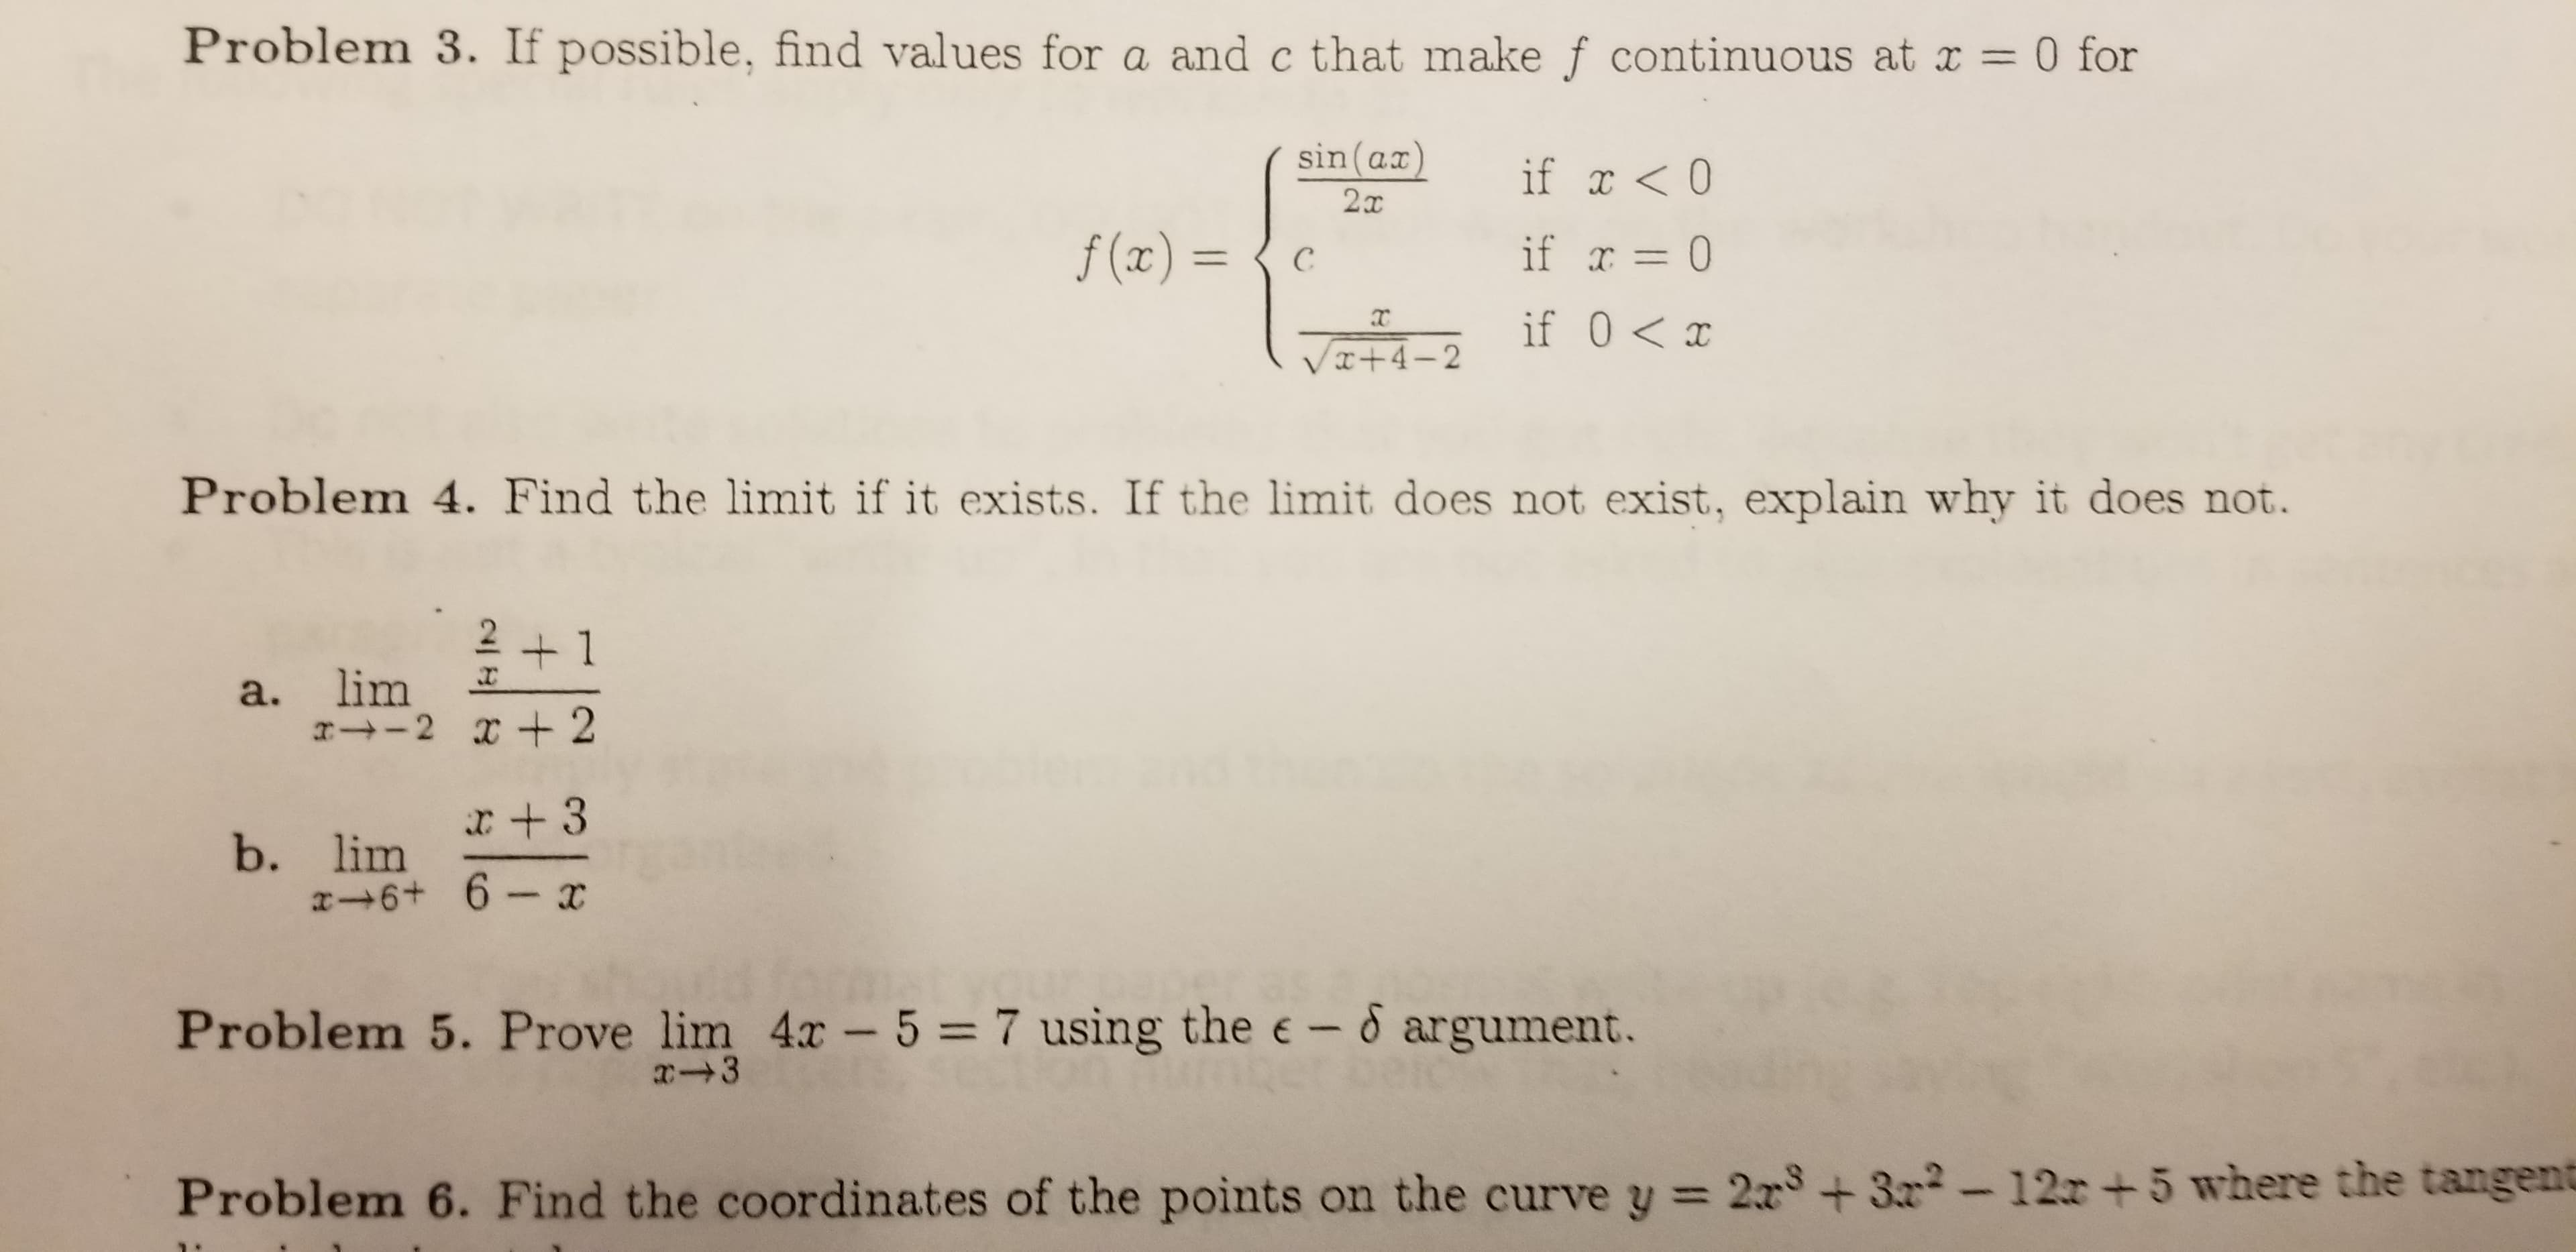 Problem 3. If possible, find values for a and c that make f continuous at x
=0 for
sin(ax)
if <0
f(x) =
if r 0
C
if 0 x
VI+4-2
Problem 4. Find the limit if it exists. If the limit does not exist, explain why it does not.
2 +1
a. lim
-2 2
x +3
b. lim
x 6+ 6-x
Problem 5. Prove lim 4x - 5 = 7 using the e-6 argument.
x 3
Problem 6. Find the coor dinates of the points on the curve y 2x +3-12r +5 where the tangent
4
에비 &
